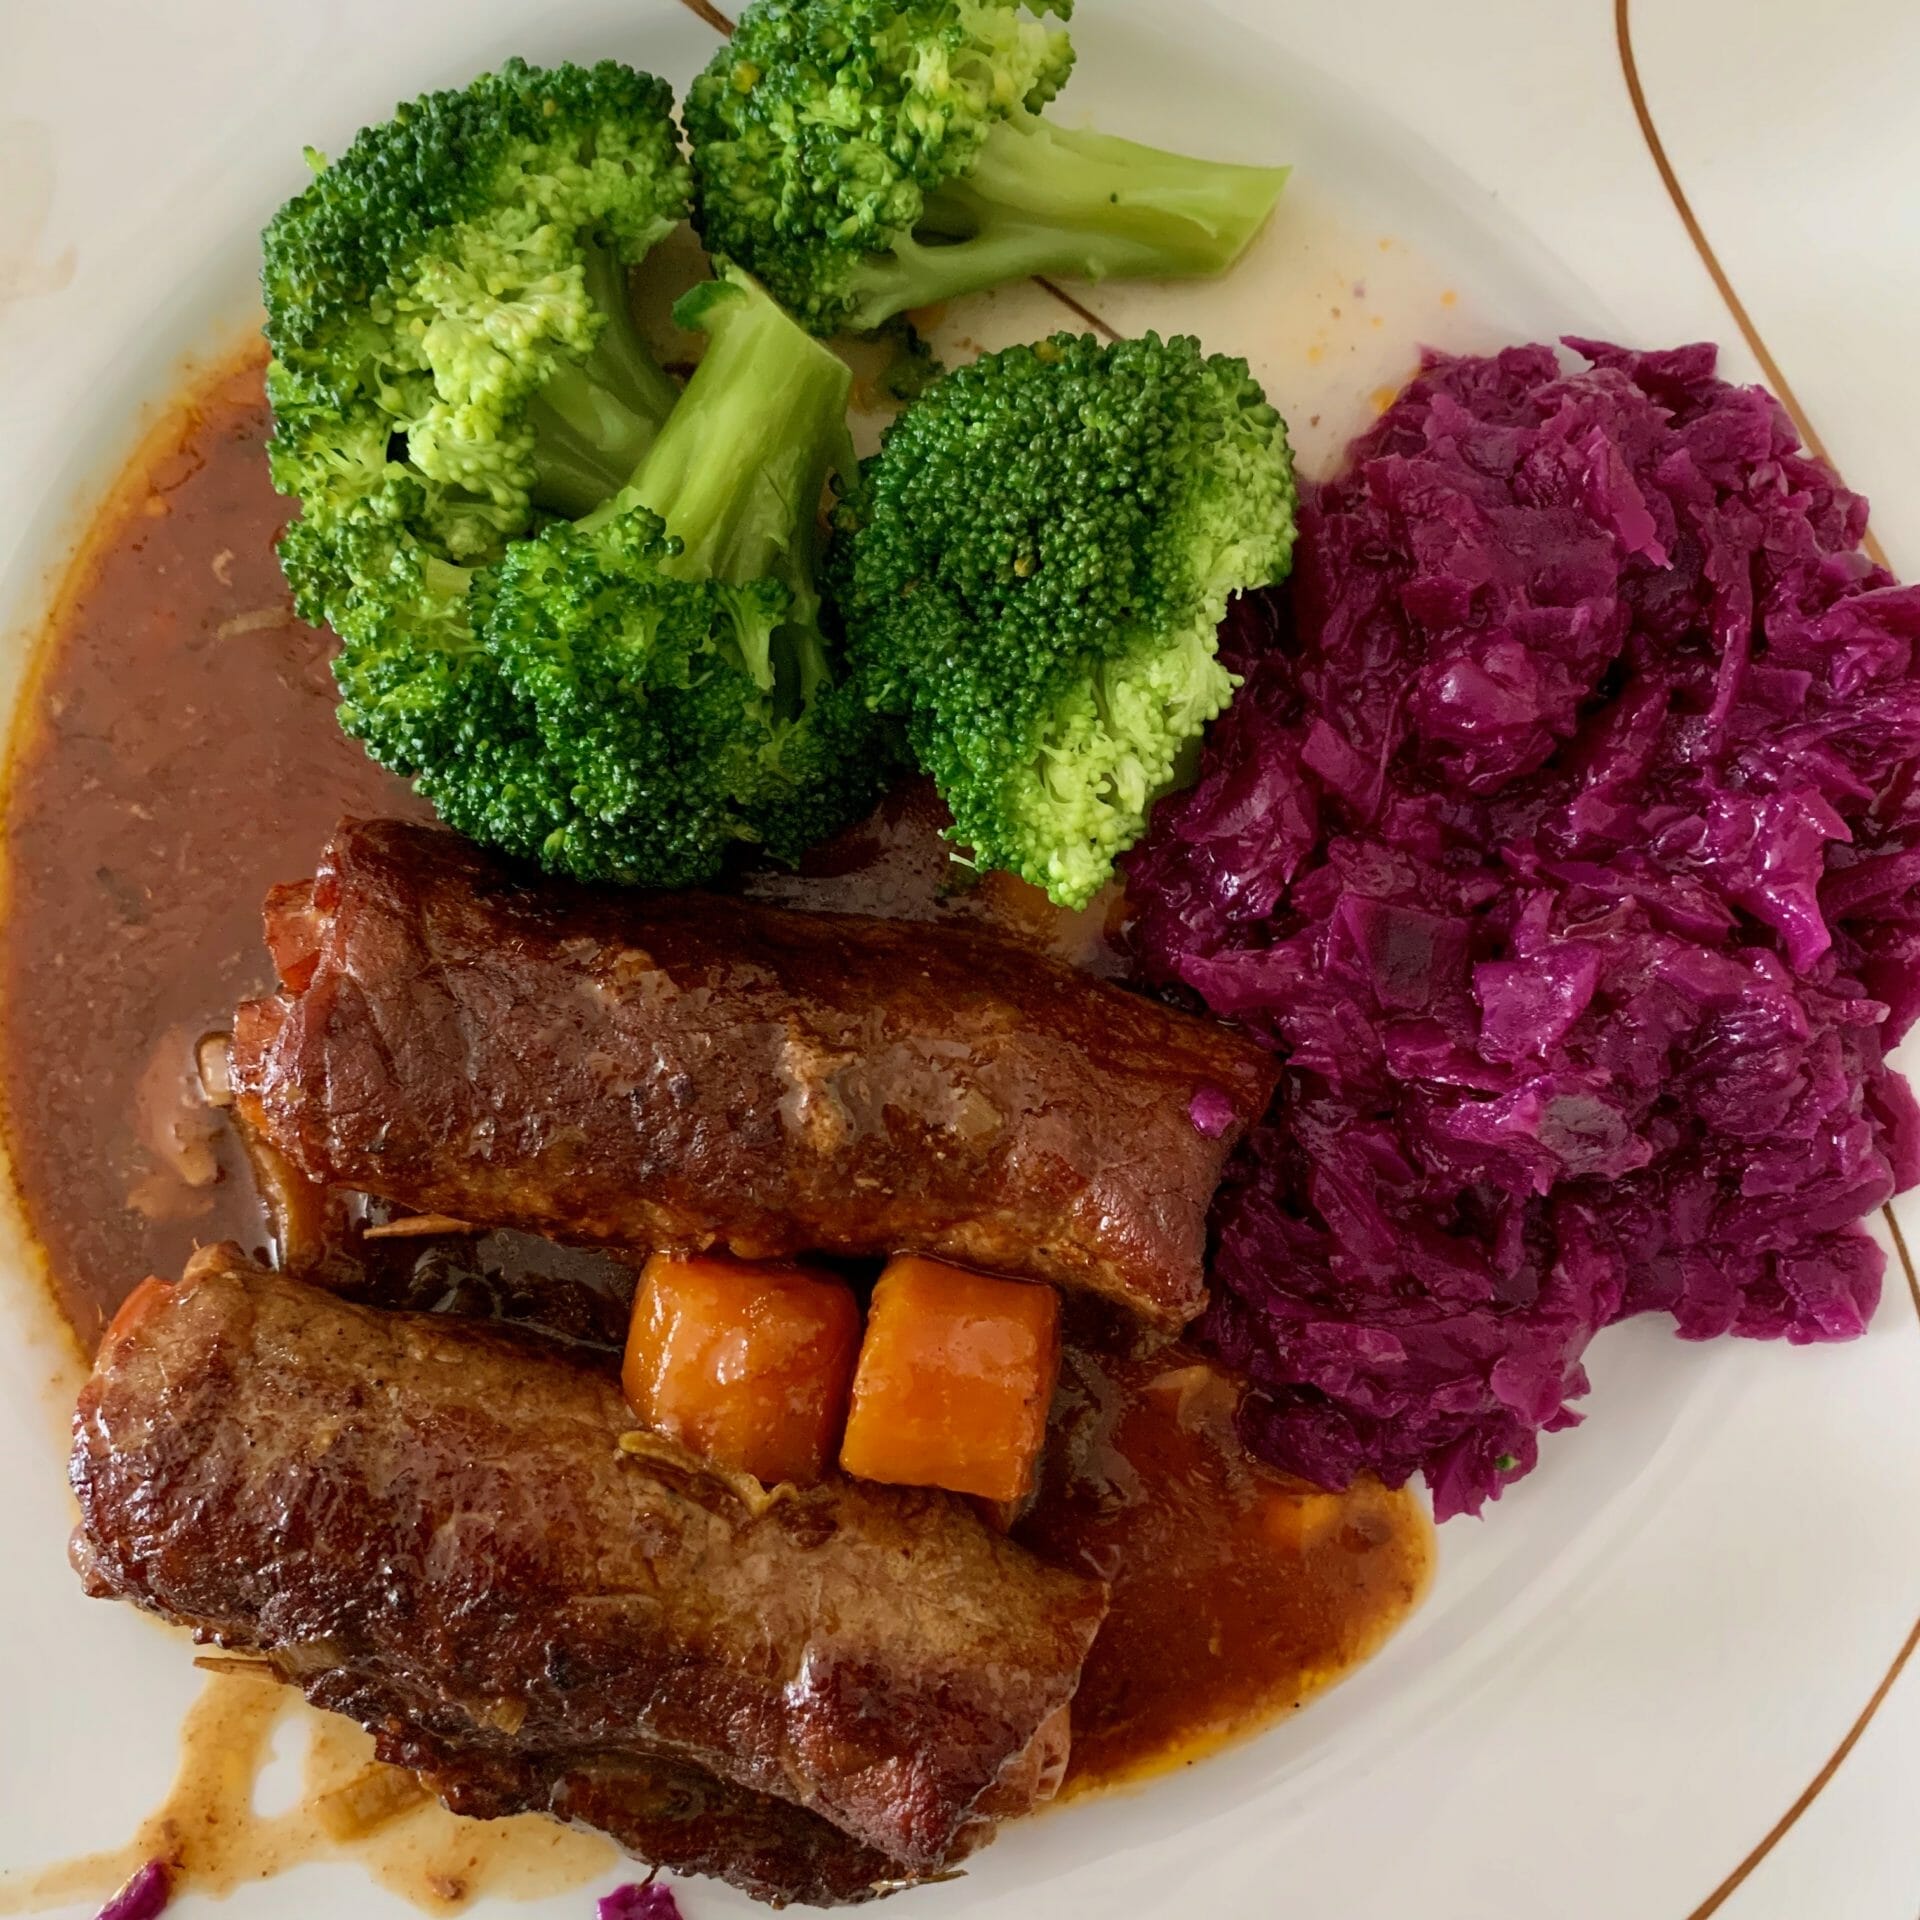 Beef stuffed with carrots and bacon, red cabbage and broccoli